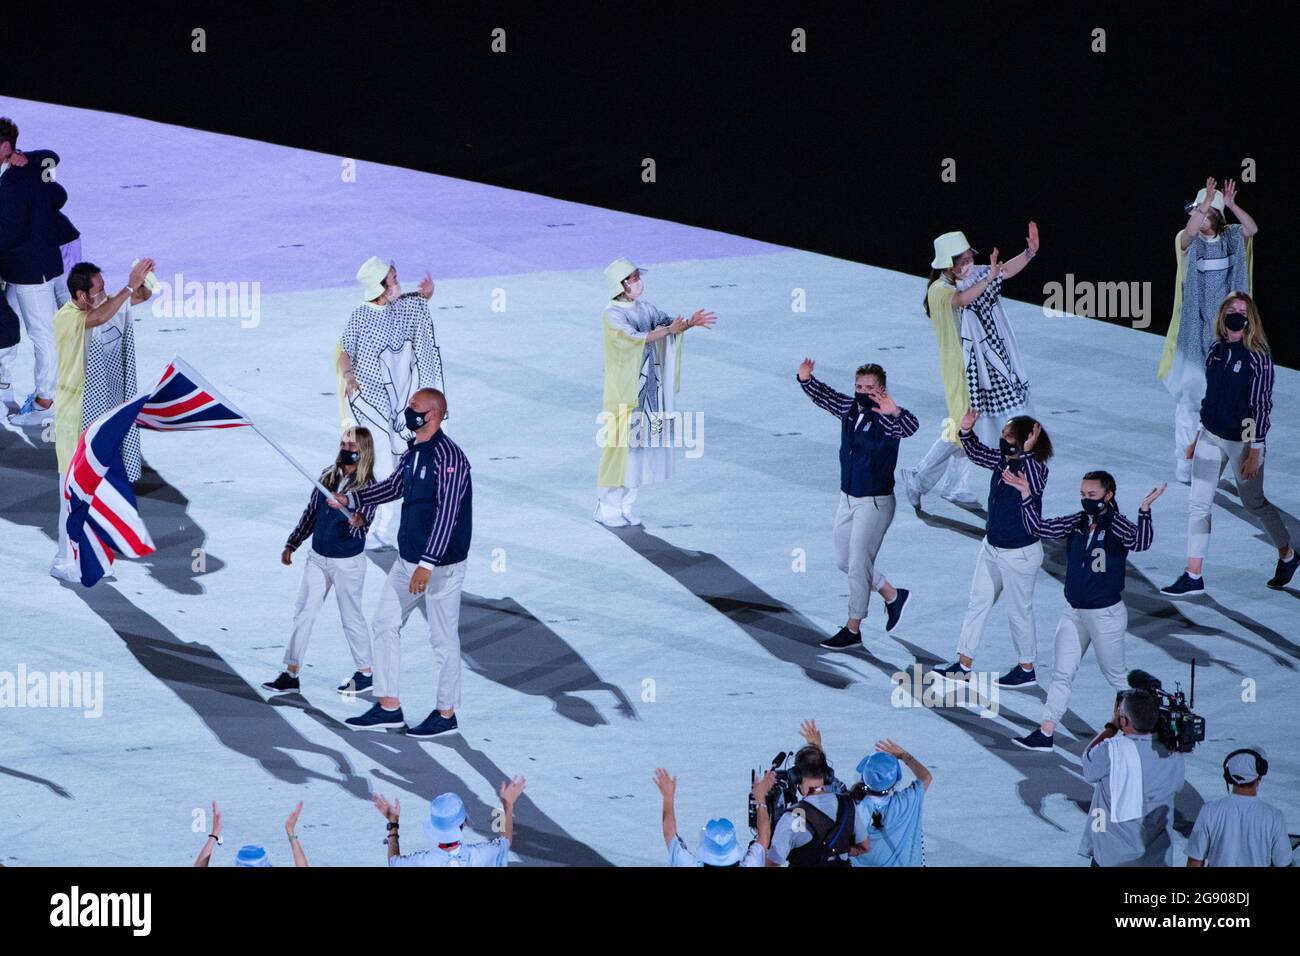 Tokyo, Japan. 23rd July, 2021. Great Britain Delegation (GBR), JULY 23, 2021: Tokyo 2020 Olympic Games Opening Ceremony at the Olympic Stadium in Tokyo, Japan. Credit: Enrico Calderoni/AFLO SPORT/Alamy Live News Credit: Aflo Co. Ltd./Alamy Live News Stock Photo